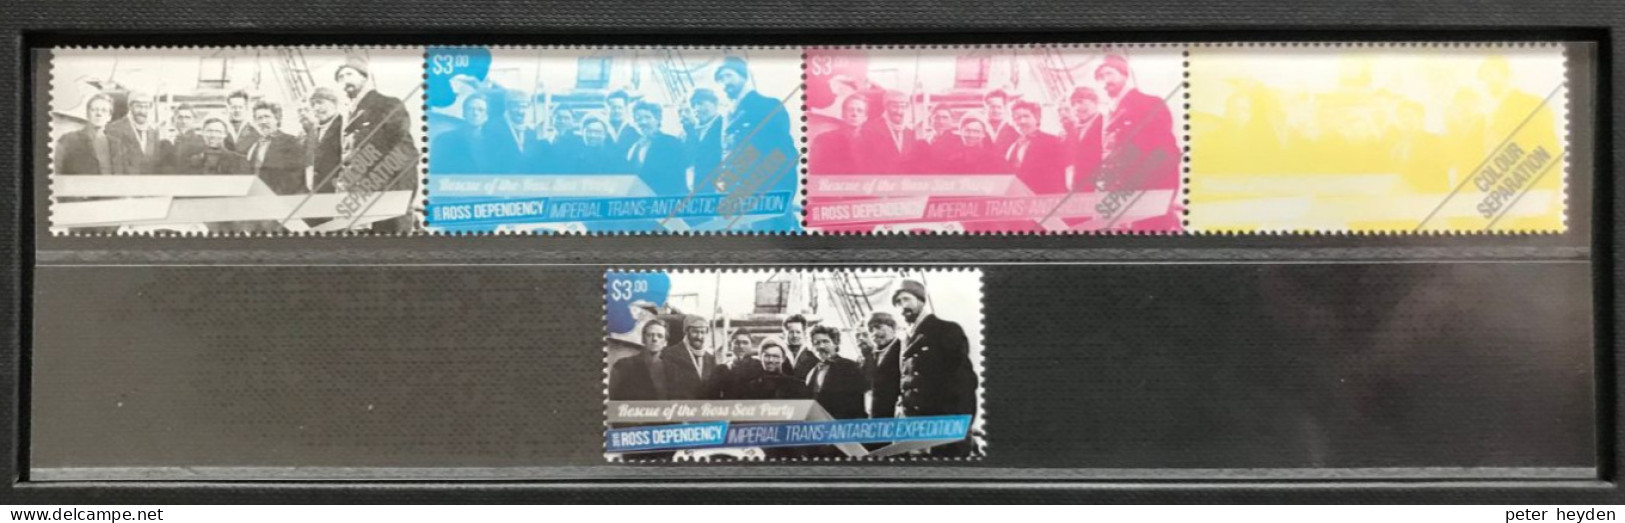 ROSS 2015 ~ DeLuxe Set With MNH ** Special Block, Se-tenant Block Of 6, Color Seperation Strip, FDC Etc. - Ungebraucht